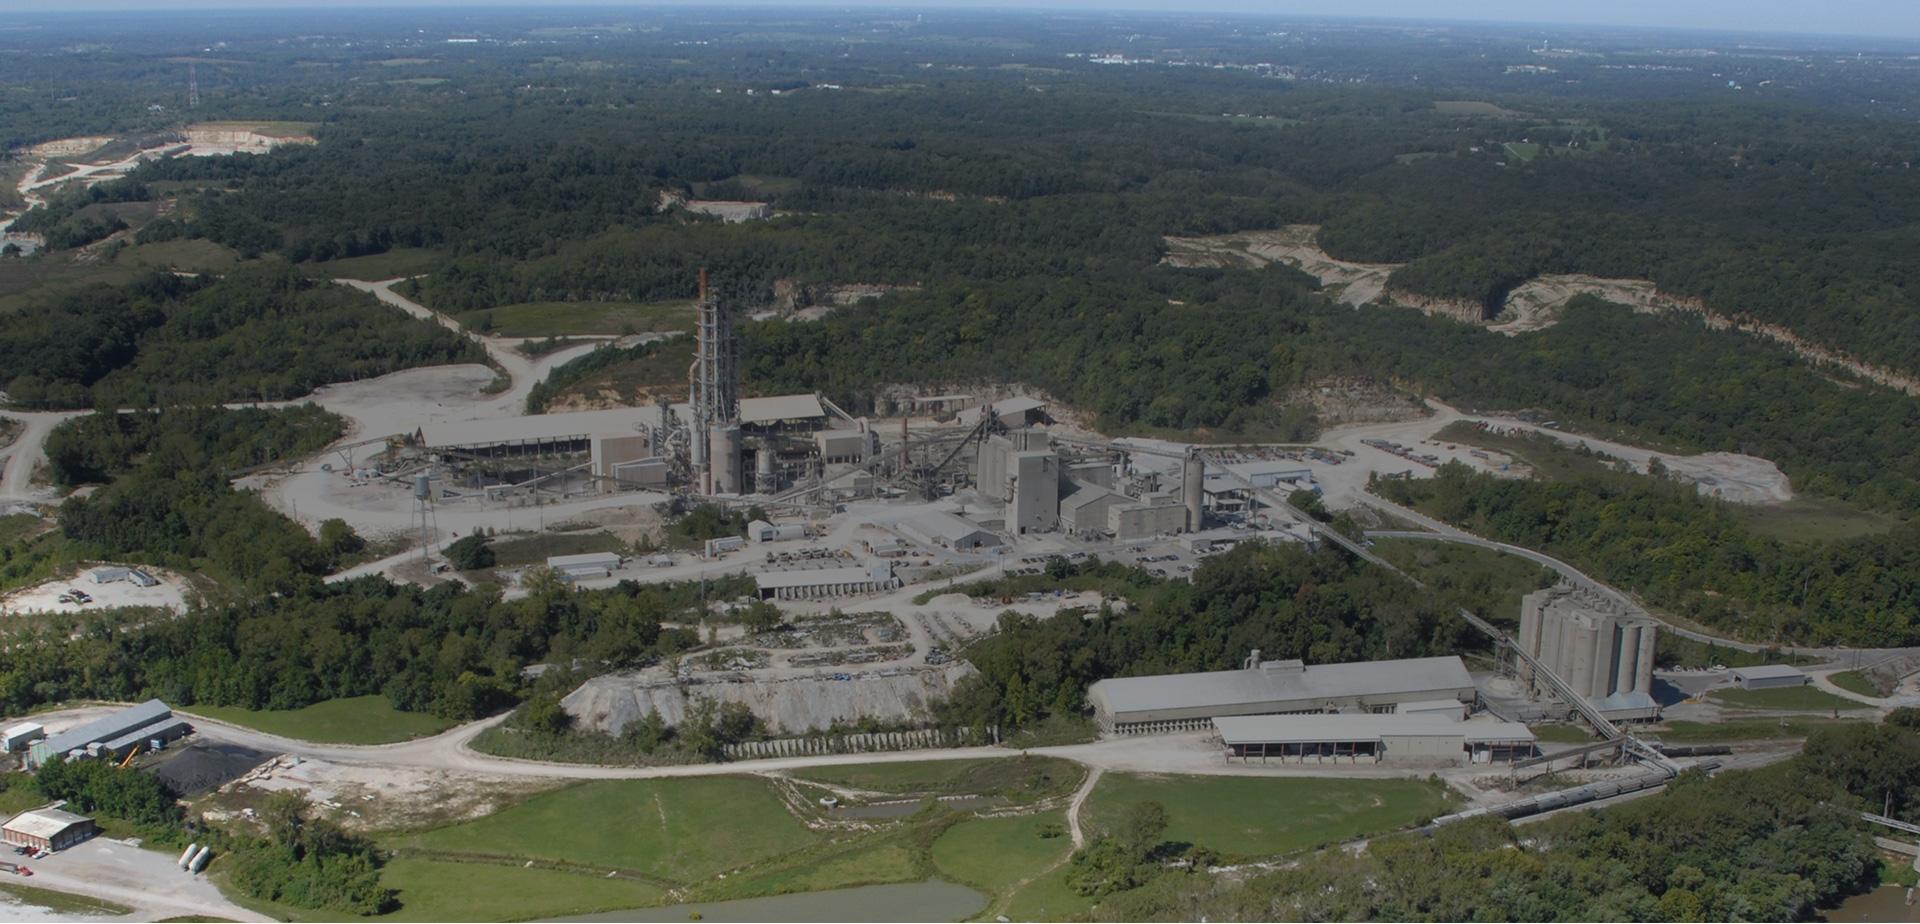 image of a cement plant